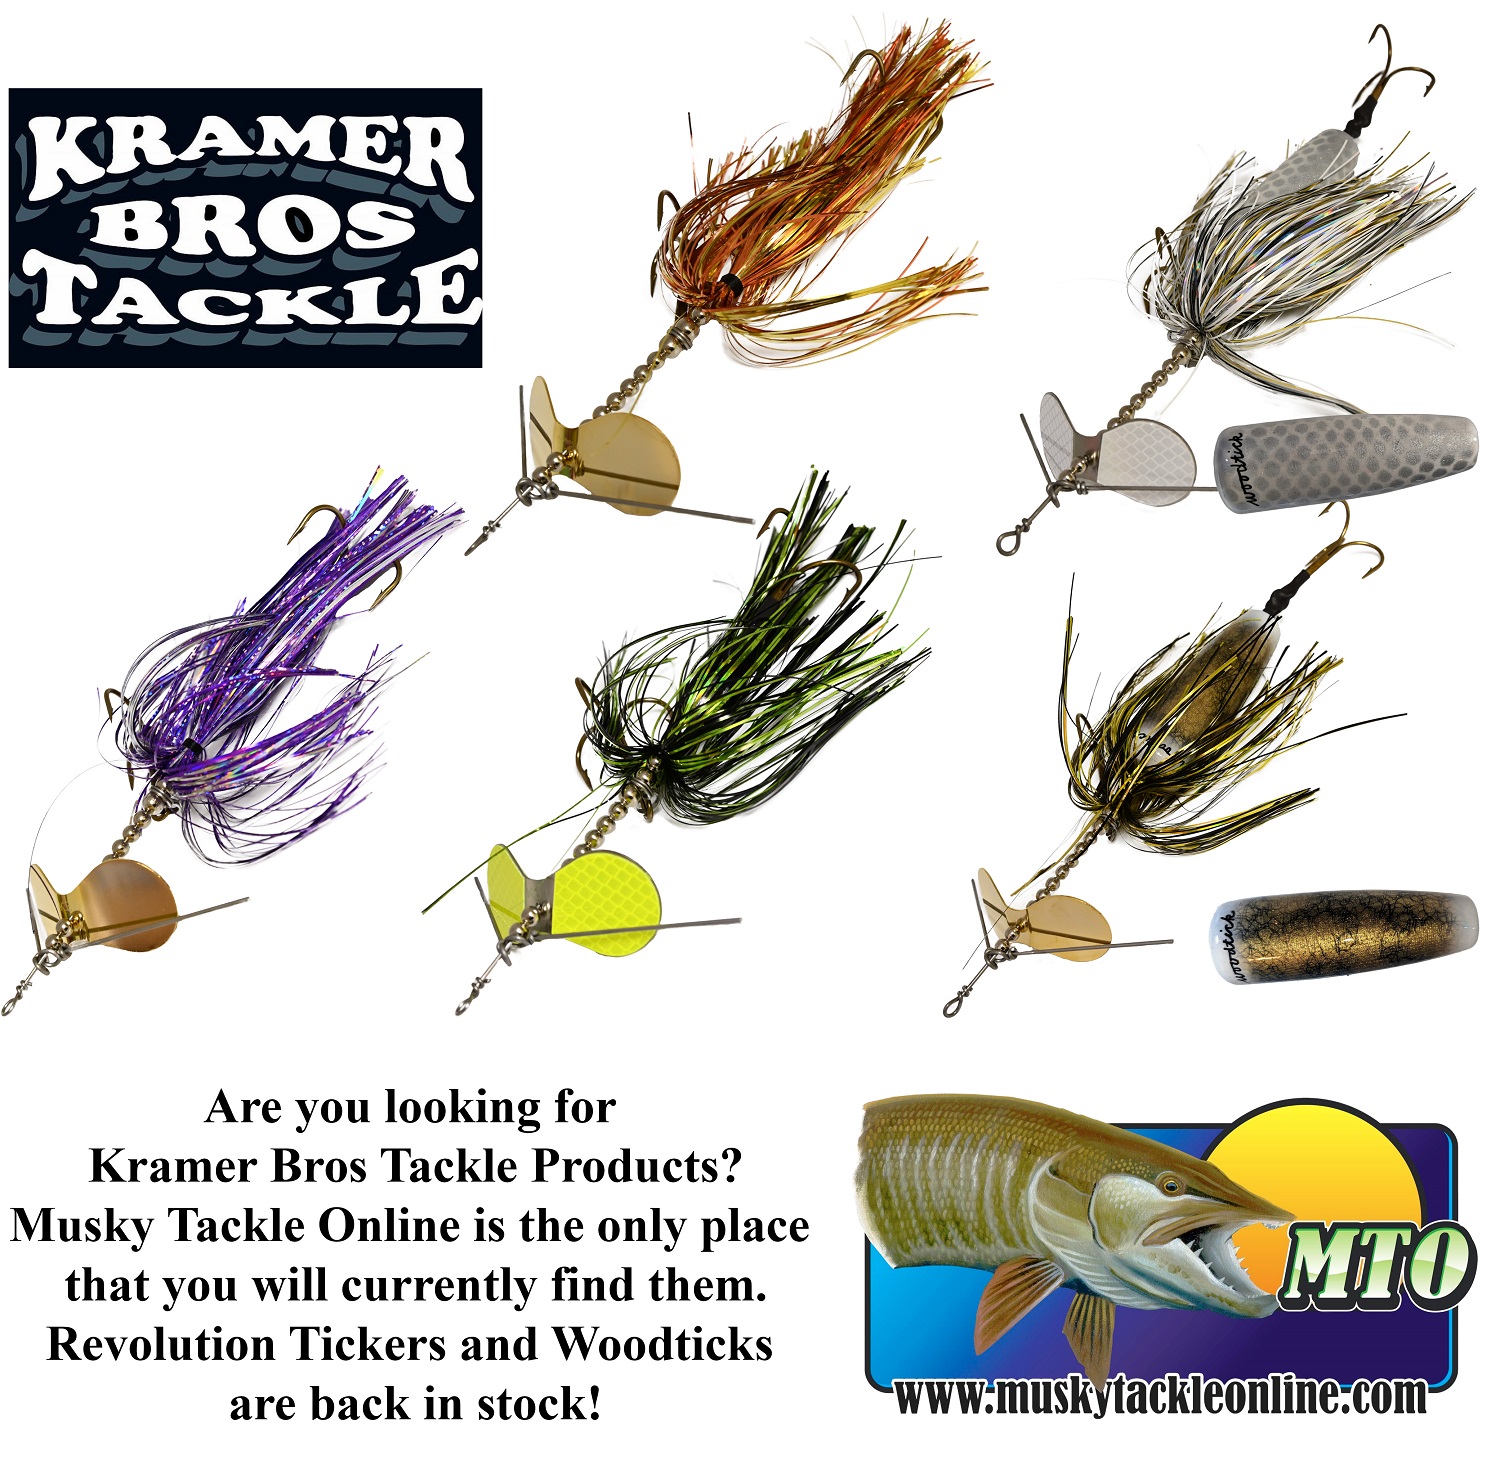 Musky Tackle Online (@MTO_Musky) / X